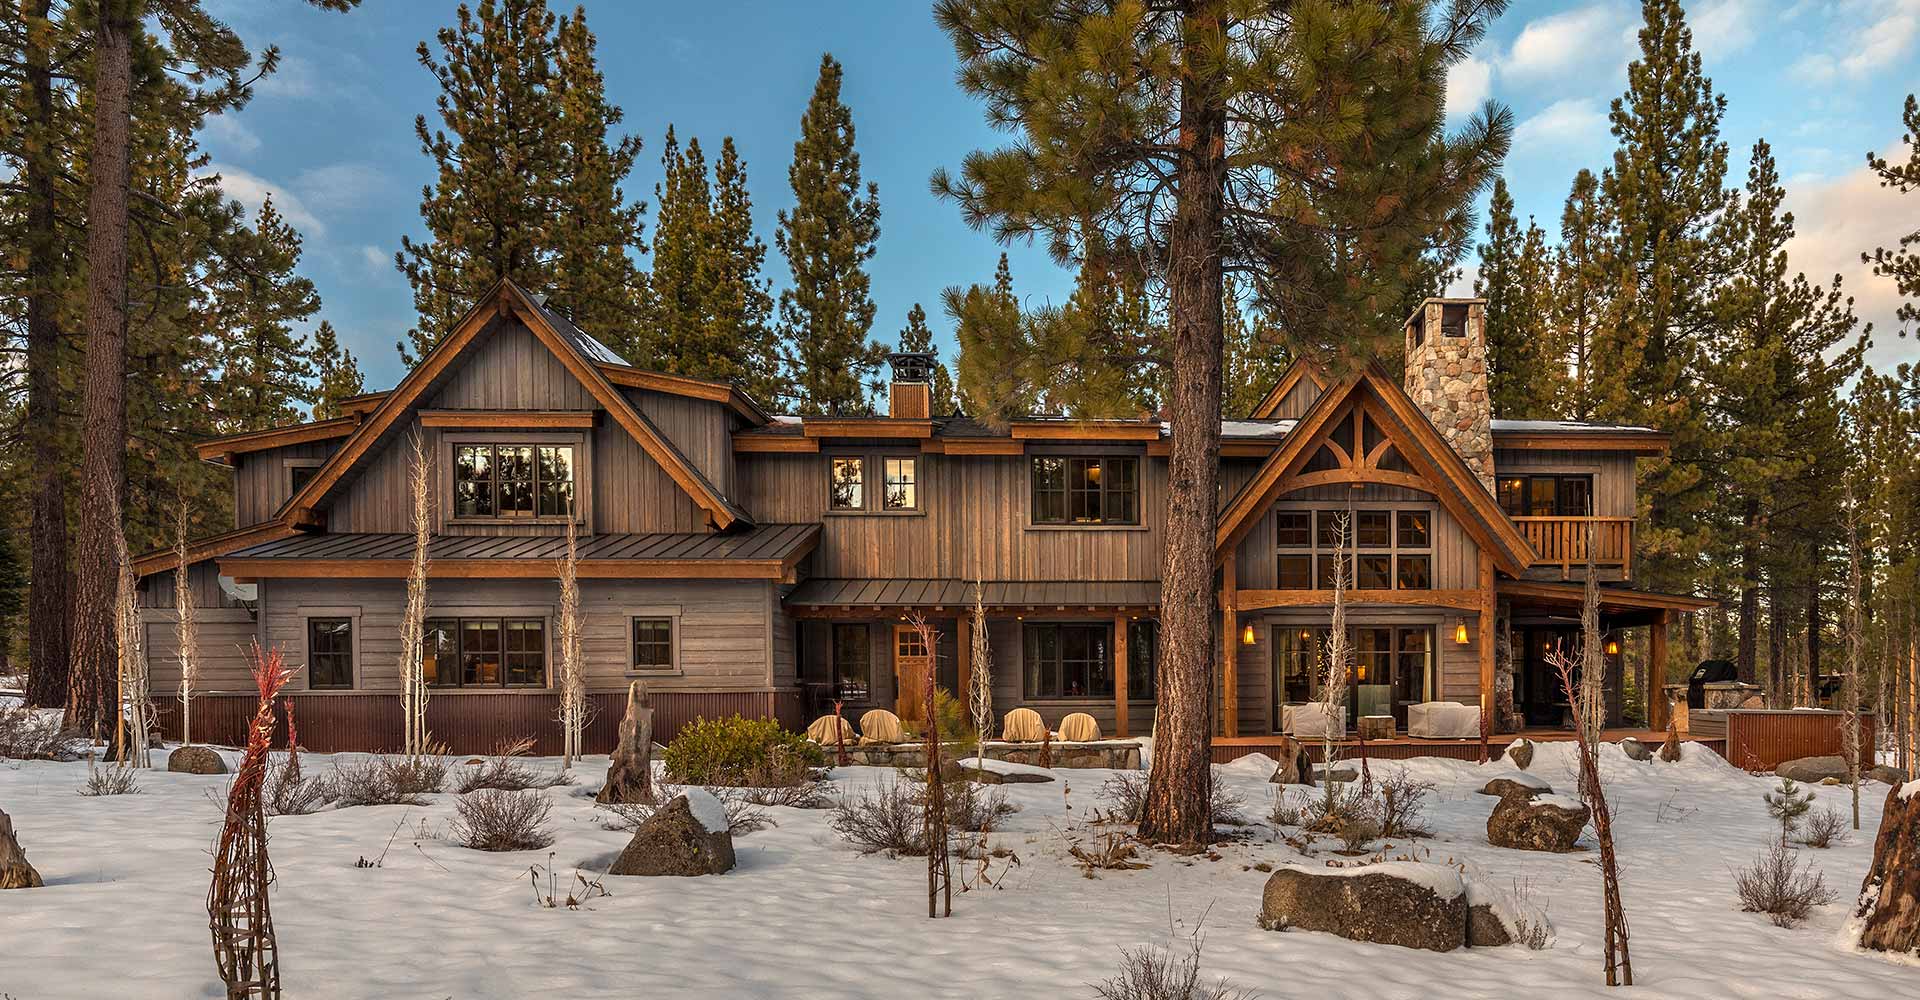 Tahoe luxury homes for sale at 10550 Fioli Drive